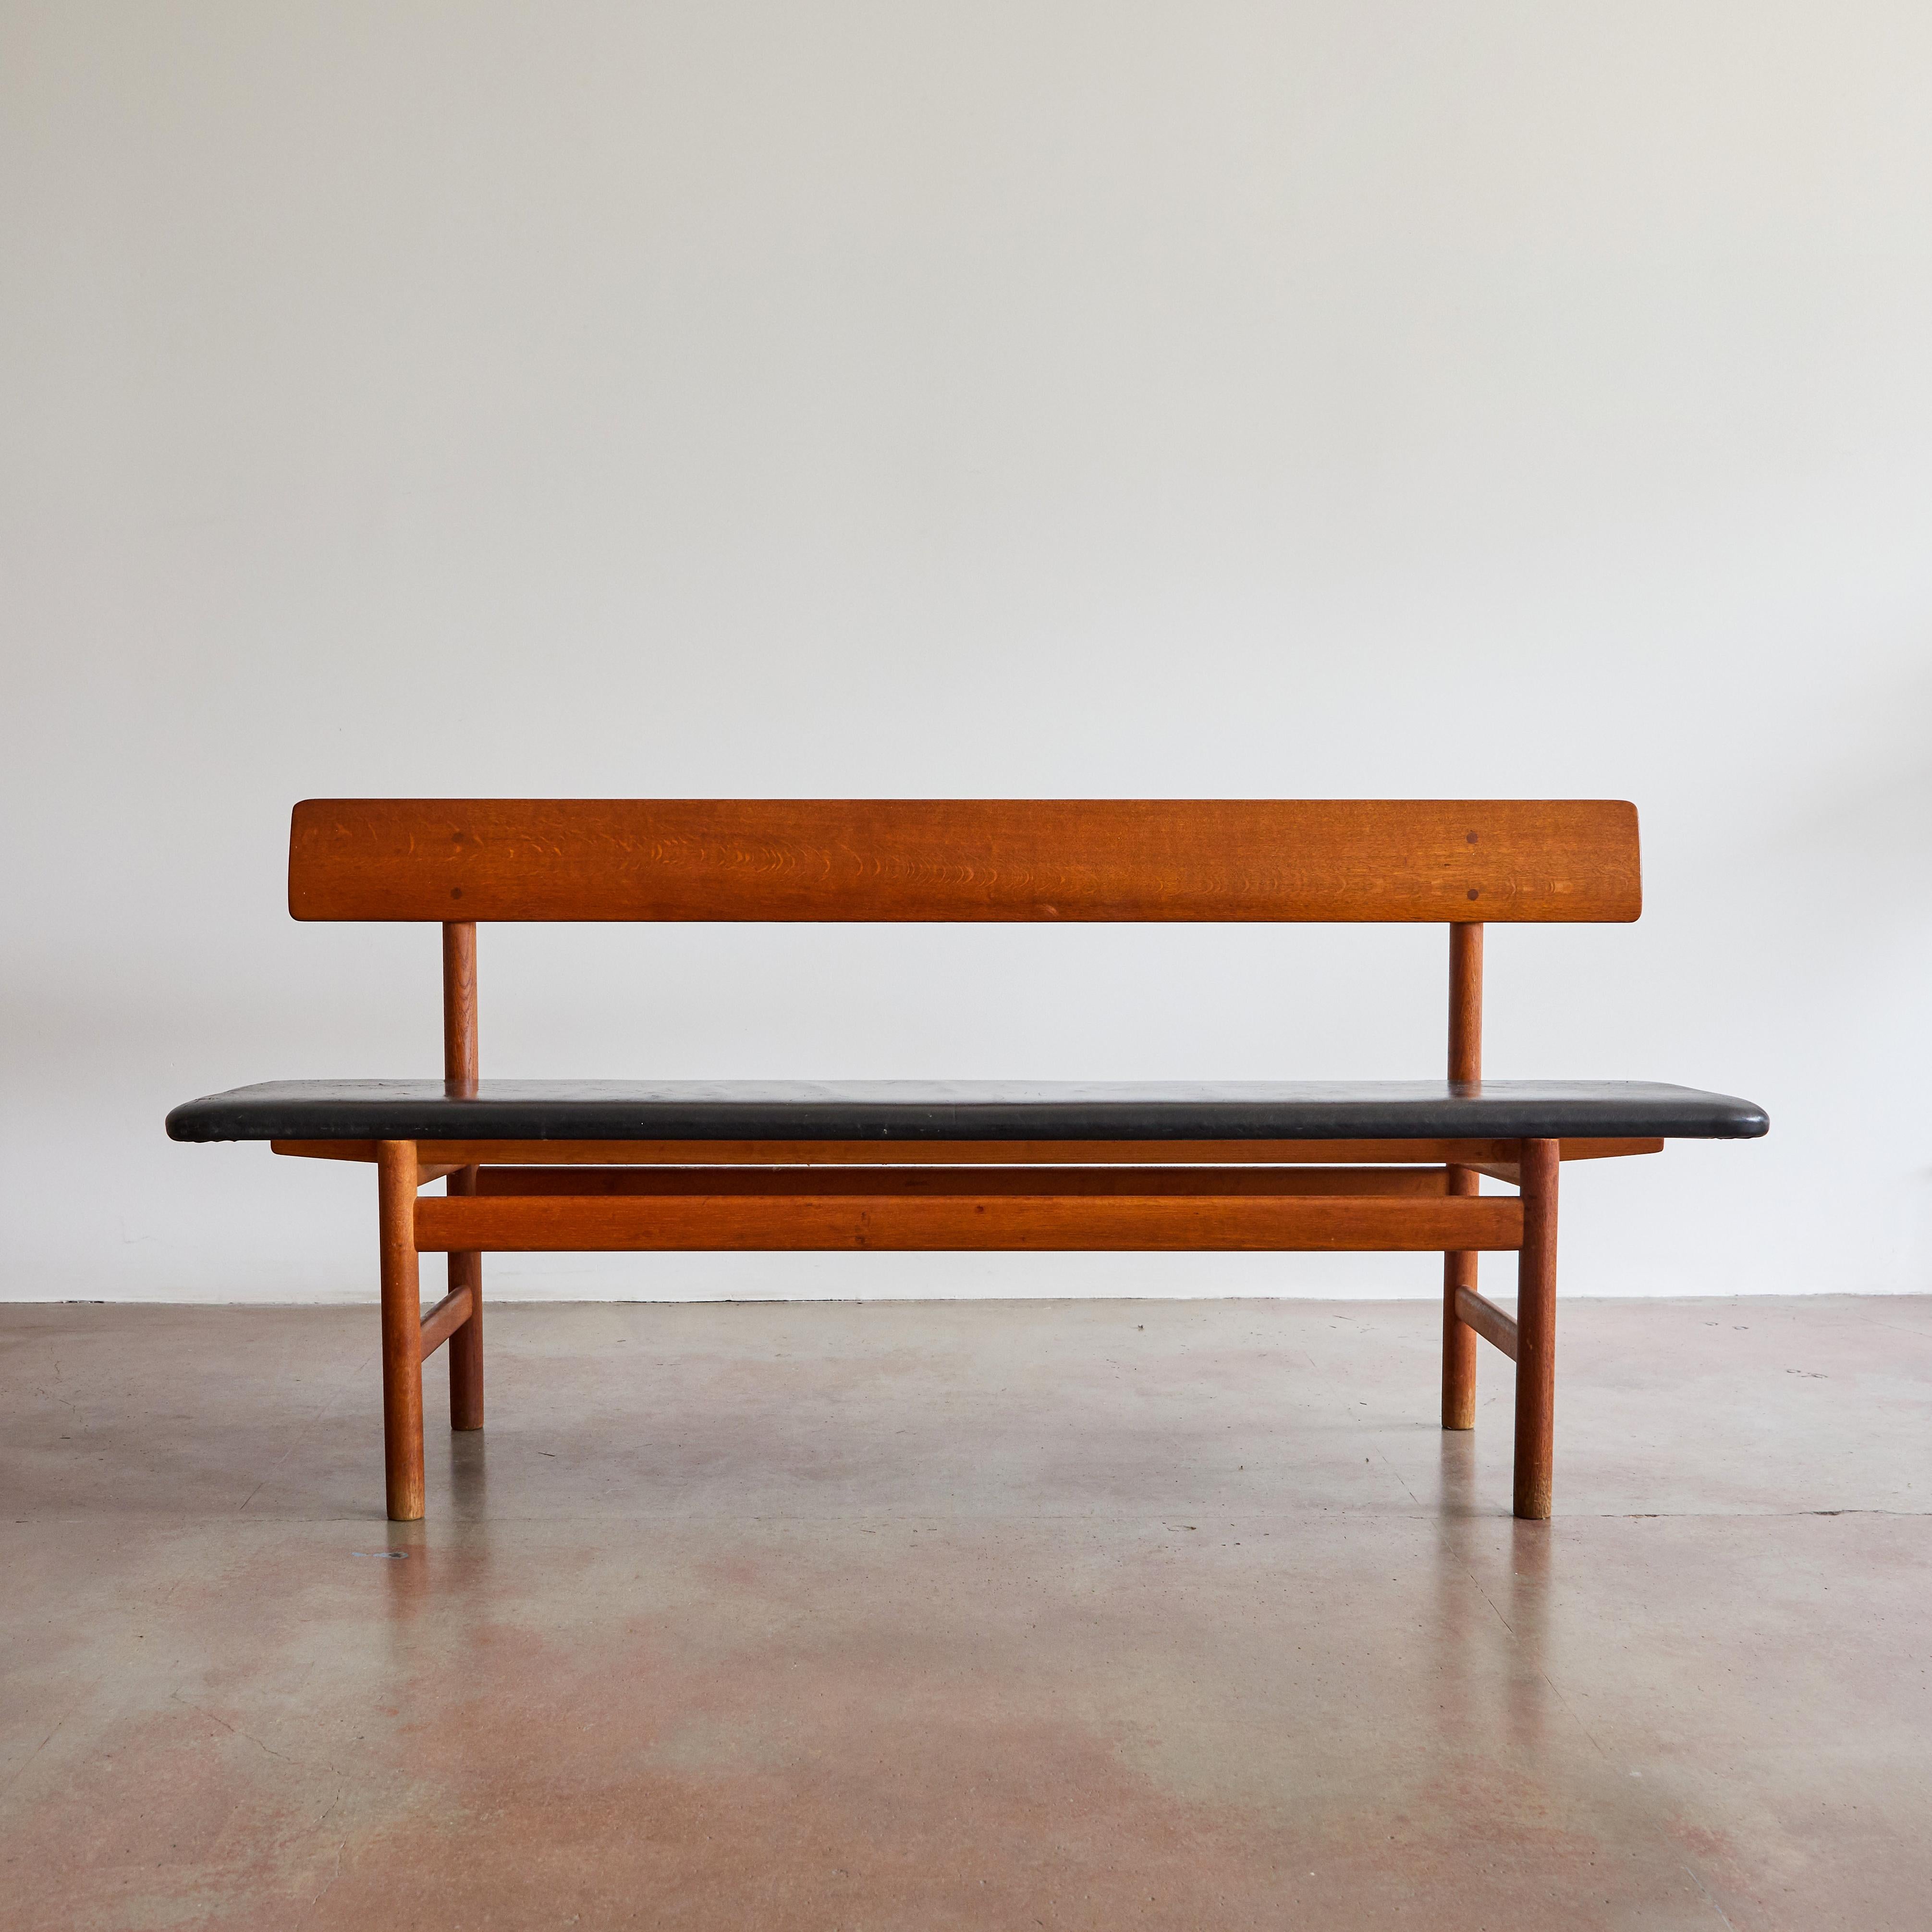 Oak bench with leather seat by Børge Mogensen for Fredericia Stolefabrik. Made in Denmark, circa 1970s.